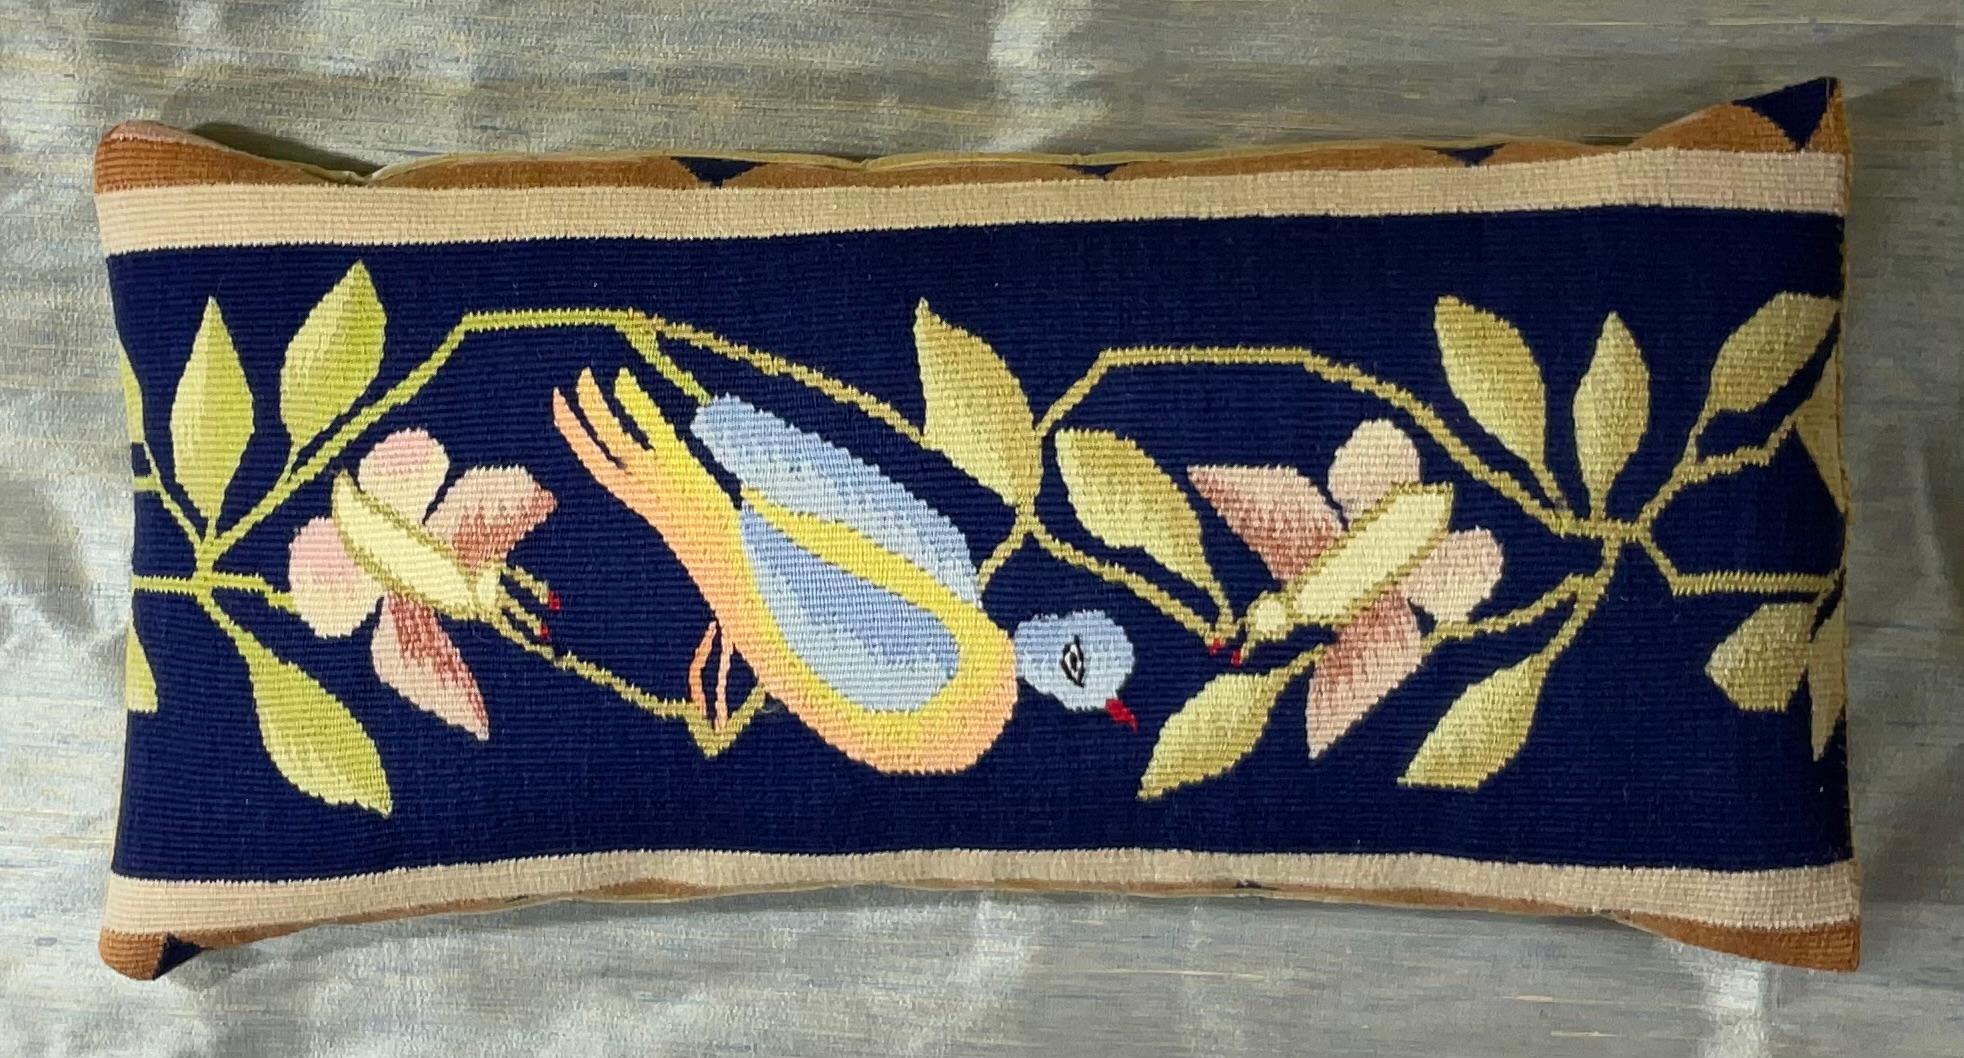 Beautiful pillow made of hand woven quality European tapestry fragment textile, great  texture, geometric  floral foliage motifs with nice bird and two butterflies look on the front .
Silk backing , and fresh insert.
Exceptional decorative piece for